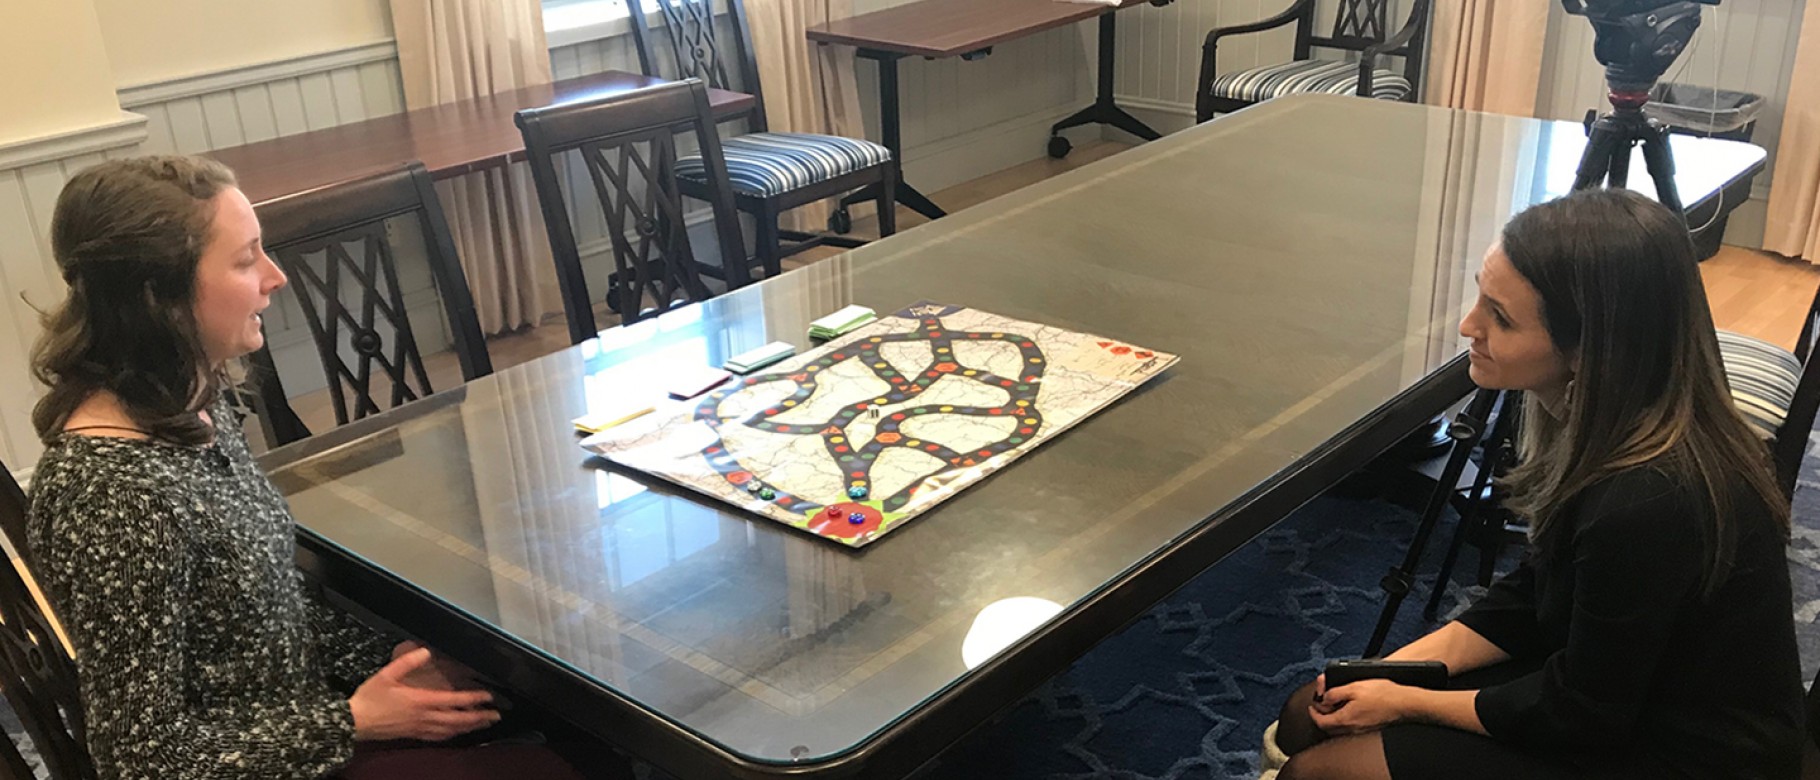 Tom Meuser and his students developed a board game designed to bring families closer together